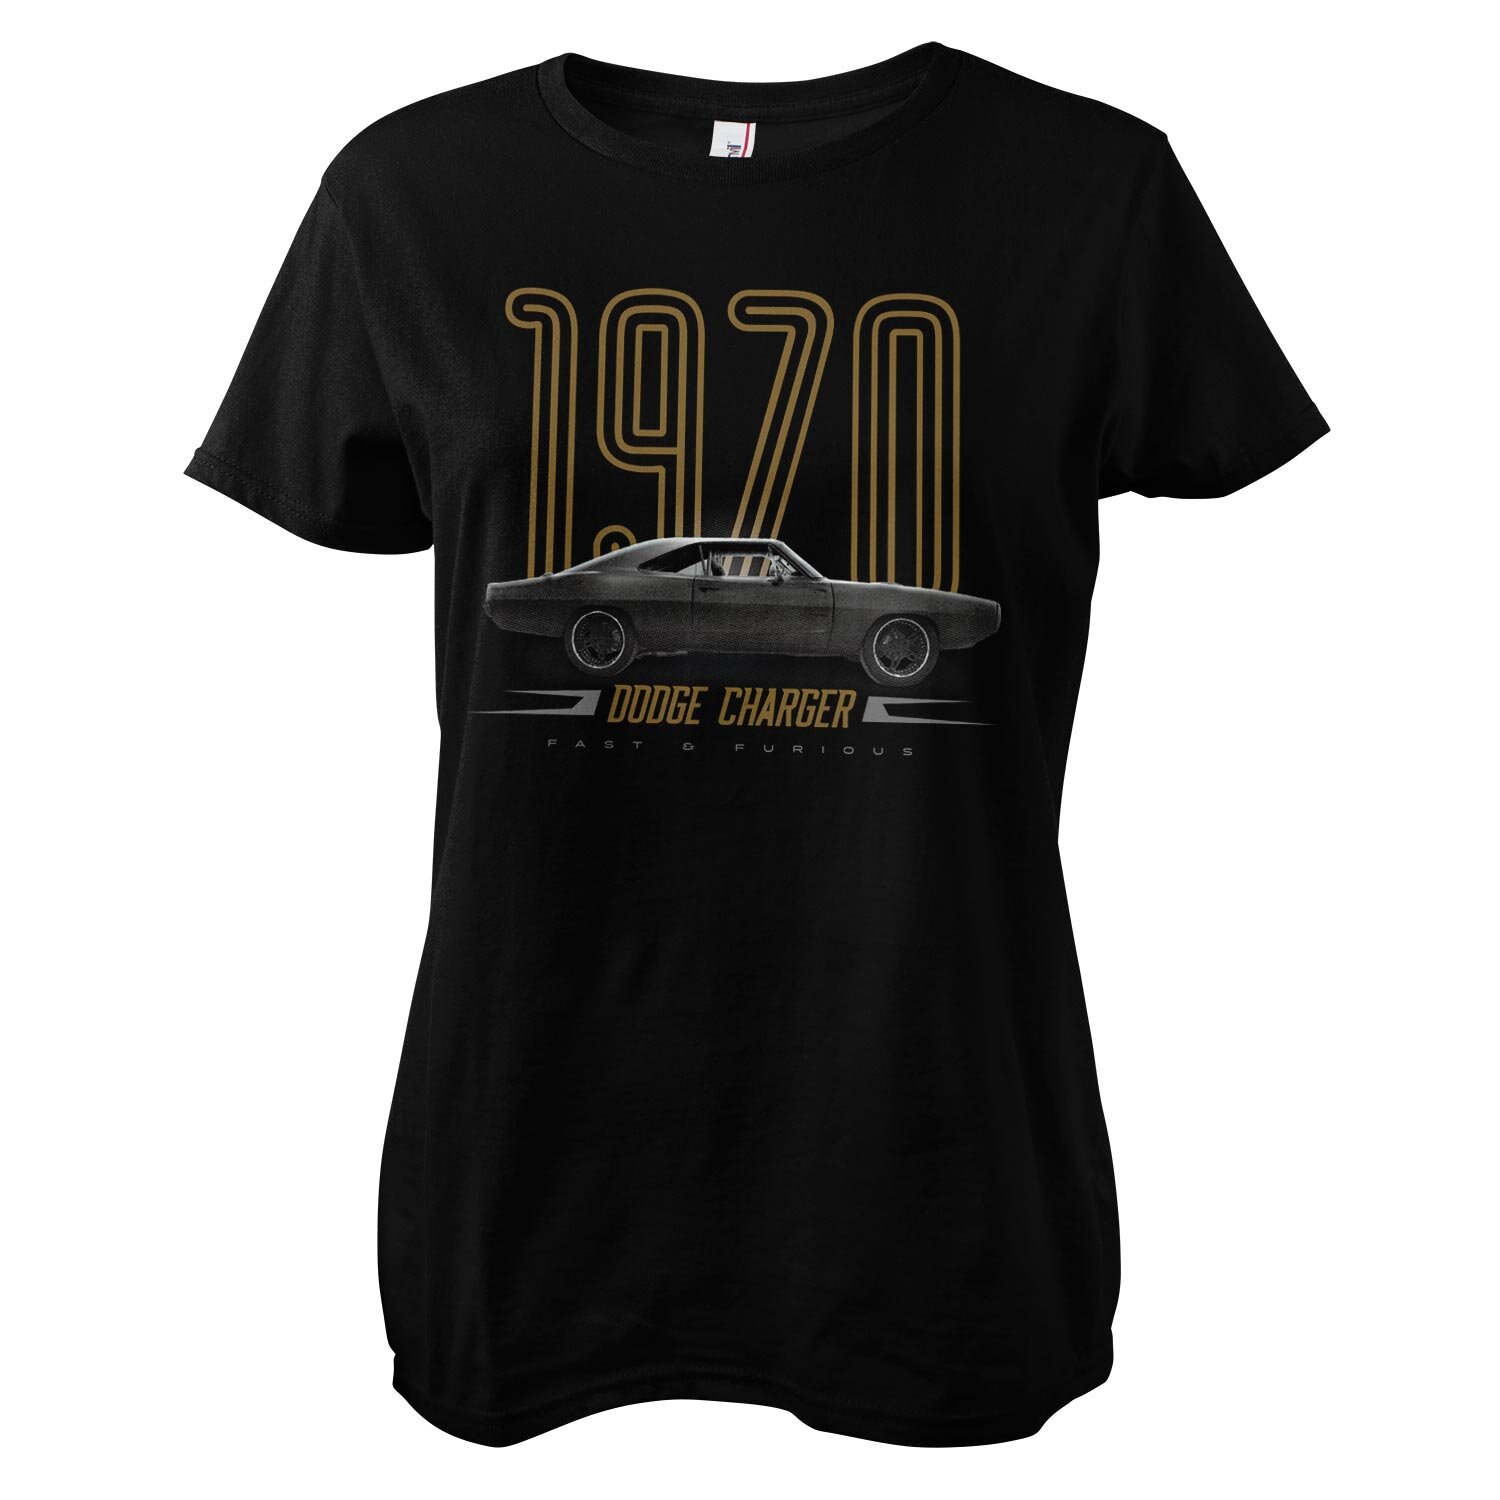 1970 Dodge Charger Girly Tee